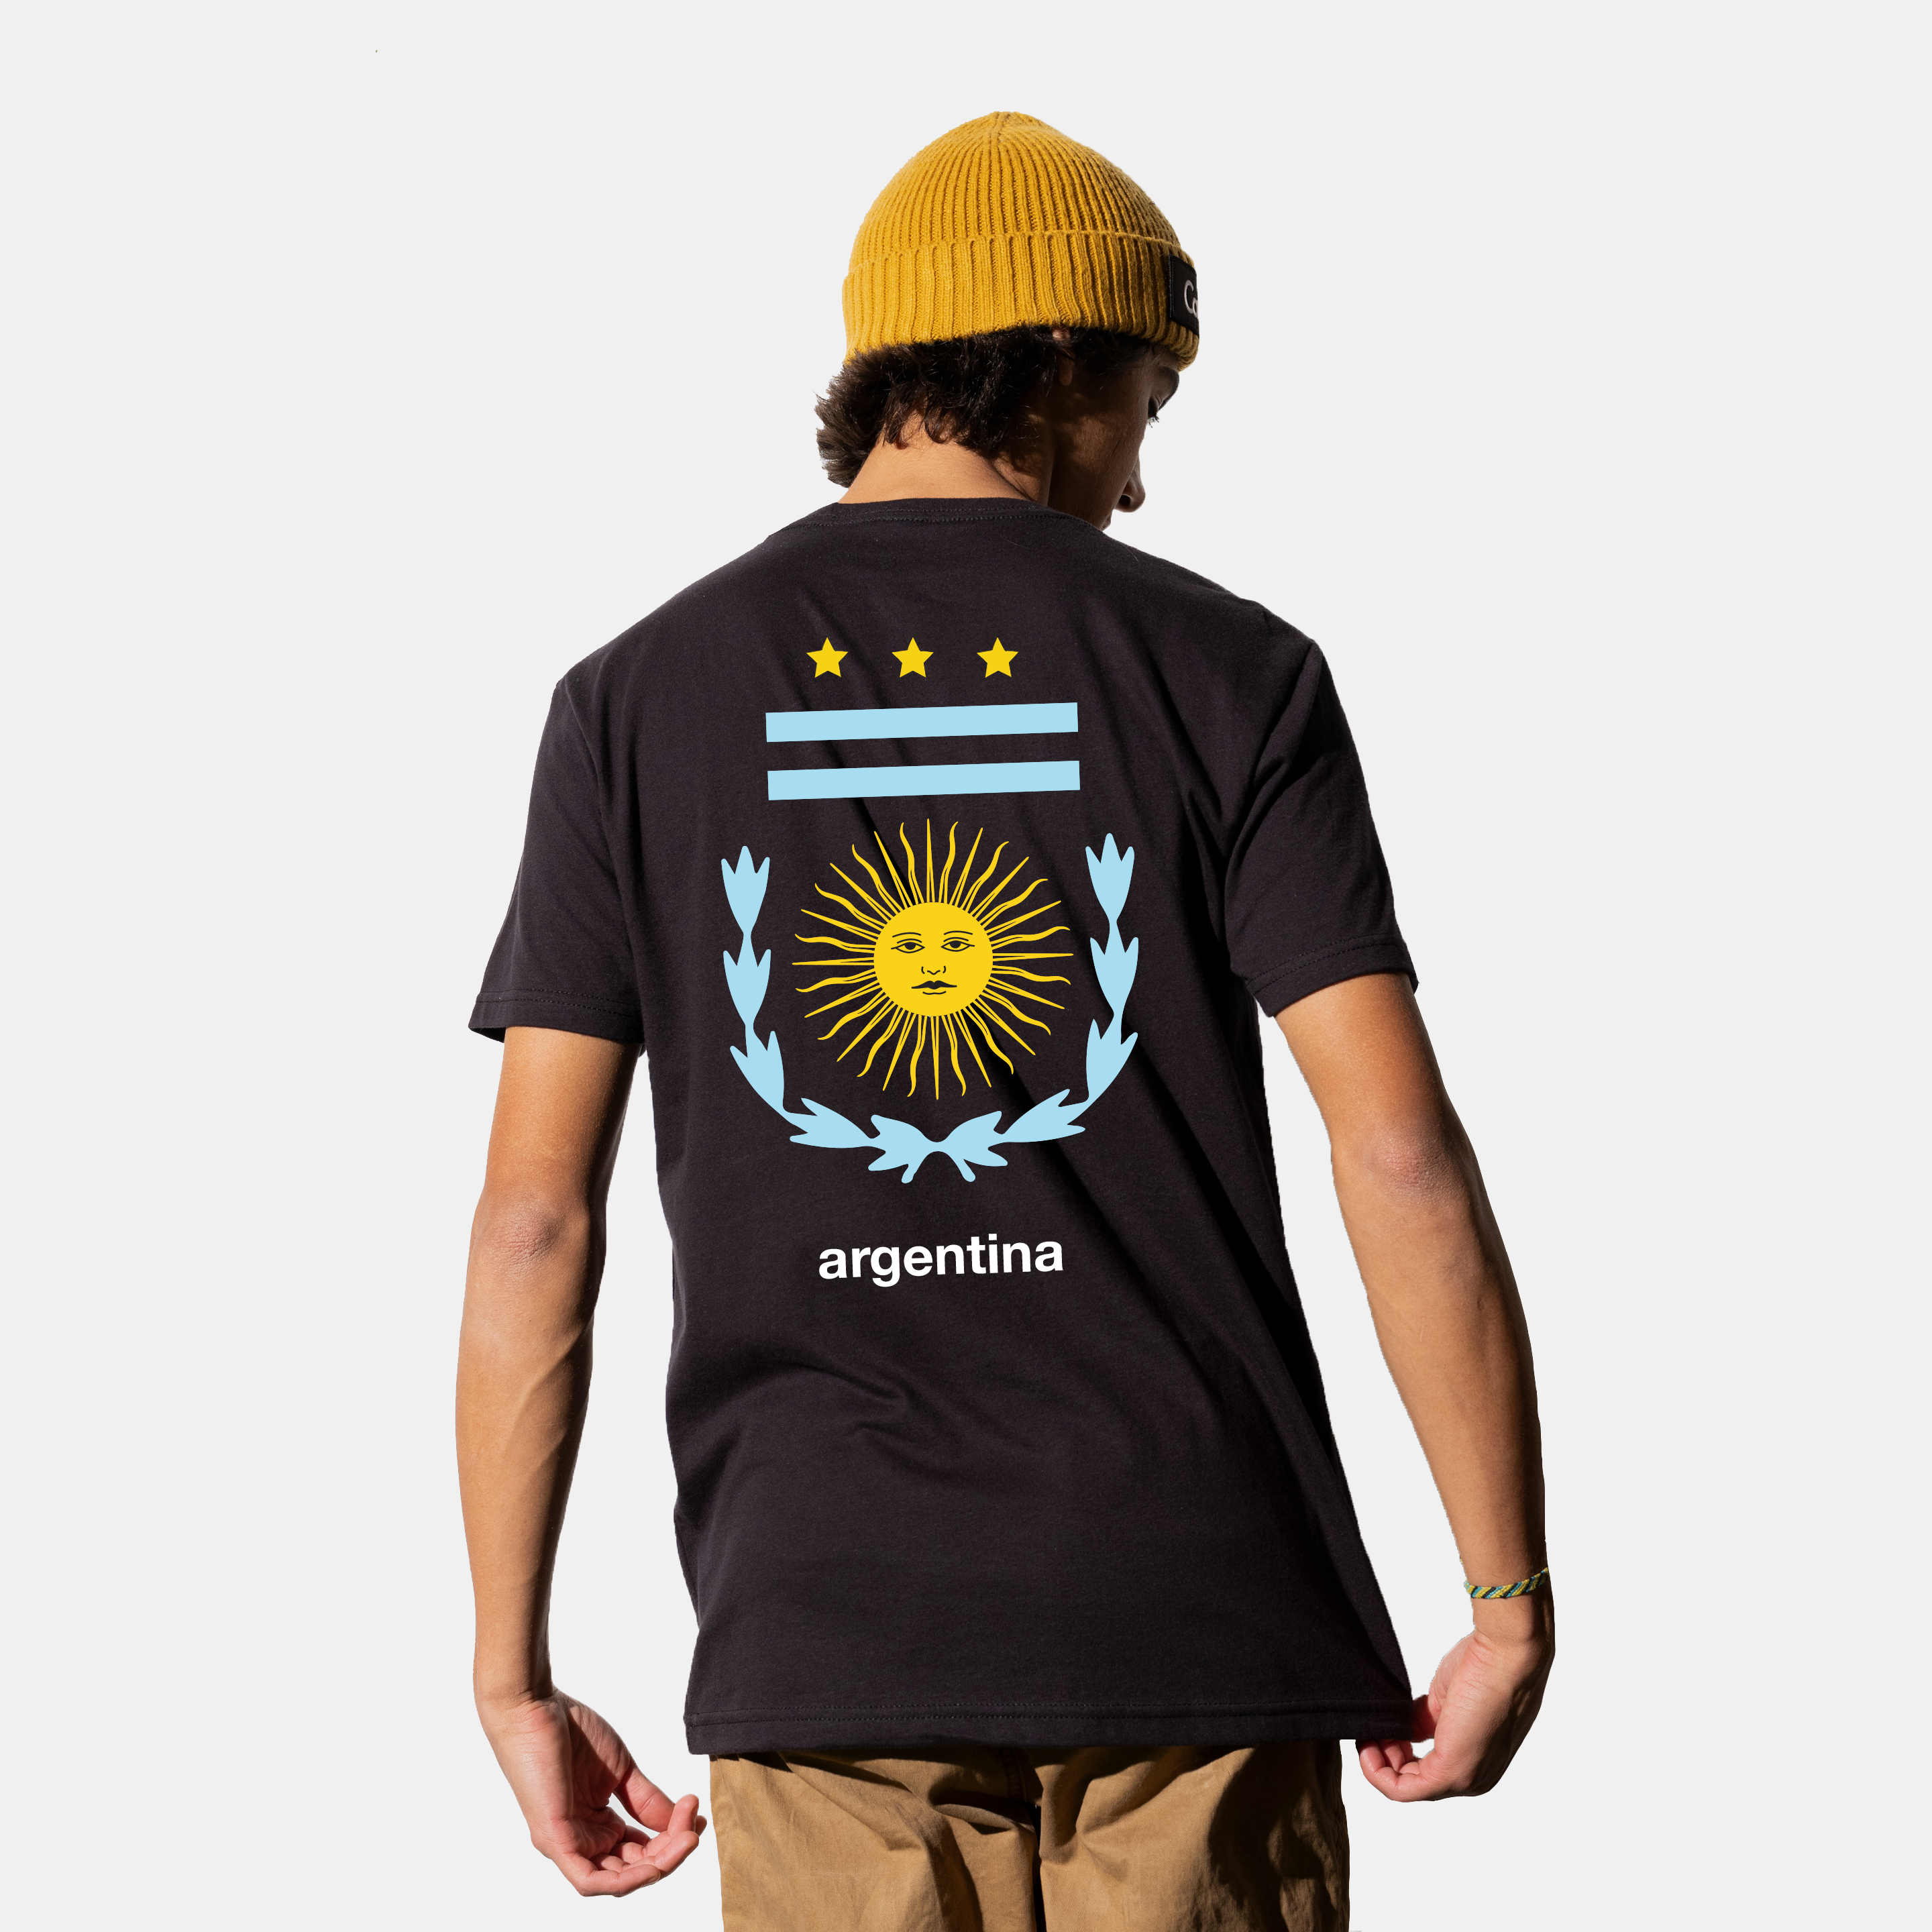 "Unofficial" Argentina Tee